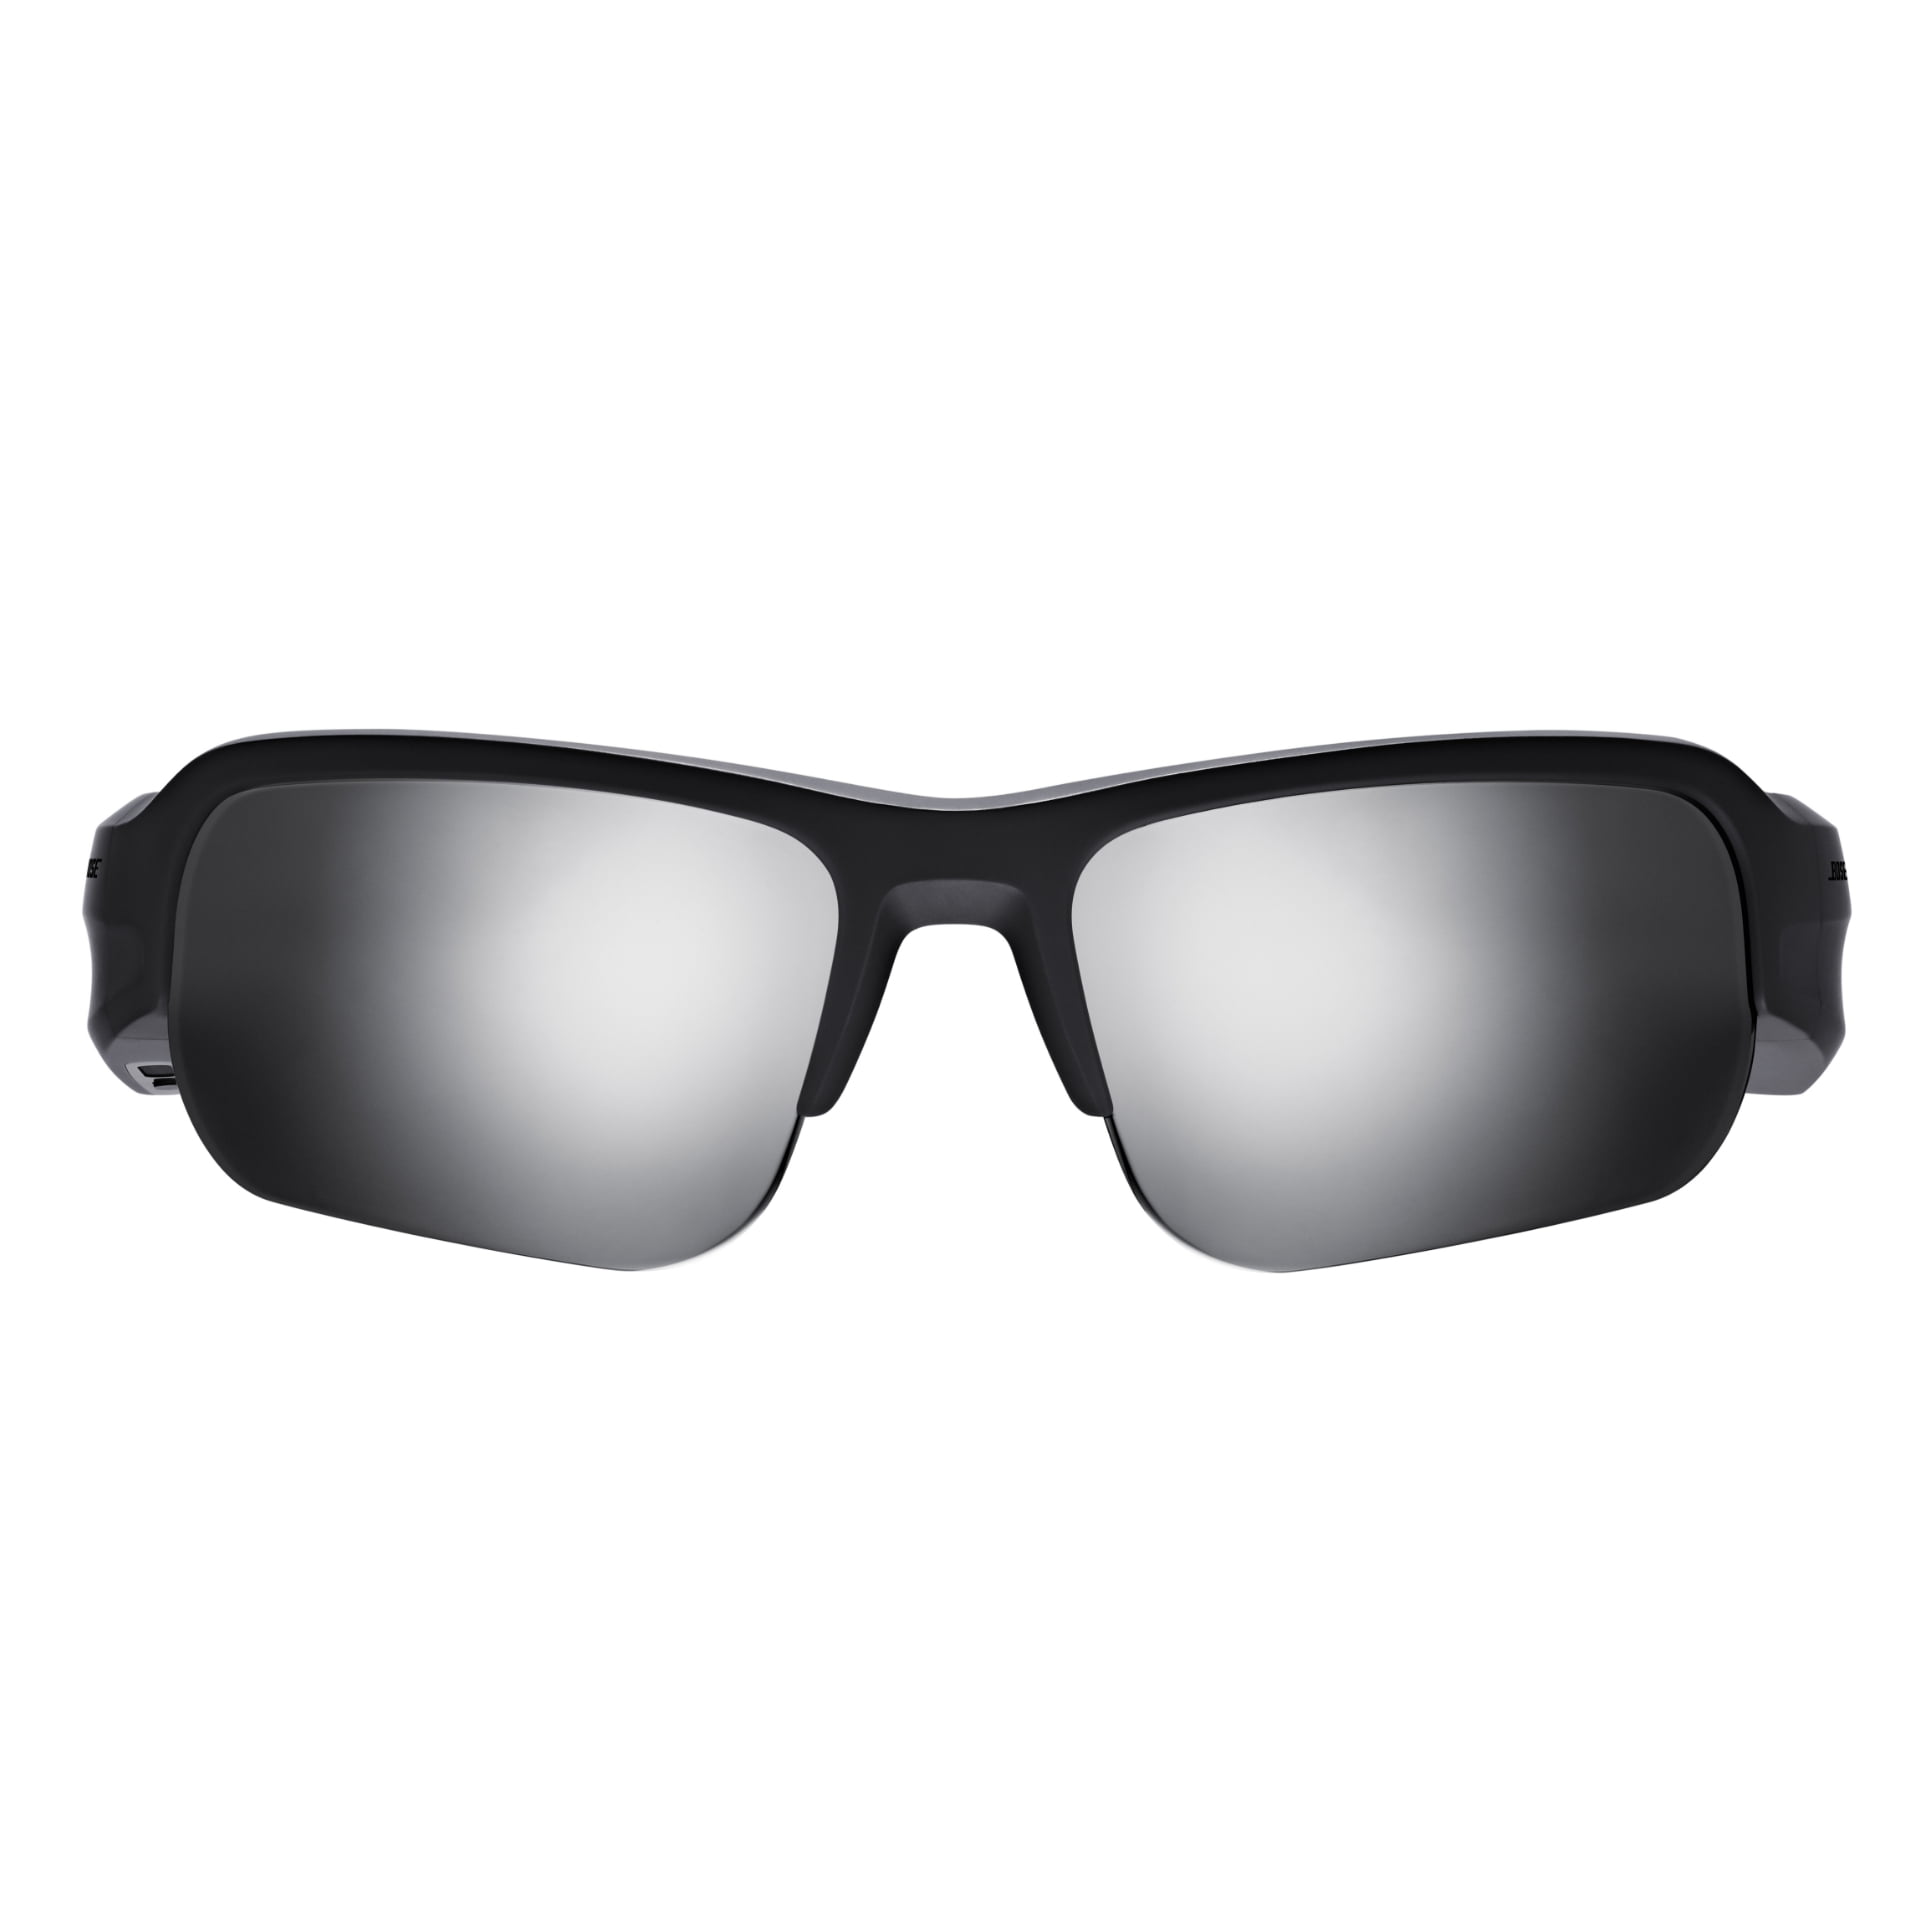 bose glasses with bluetooth